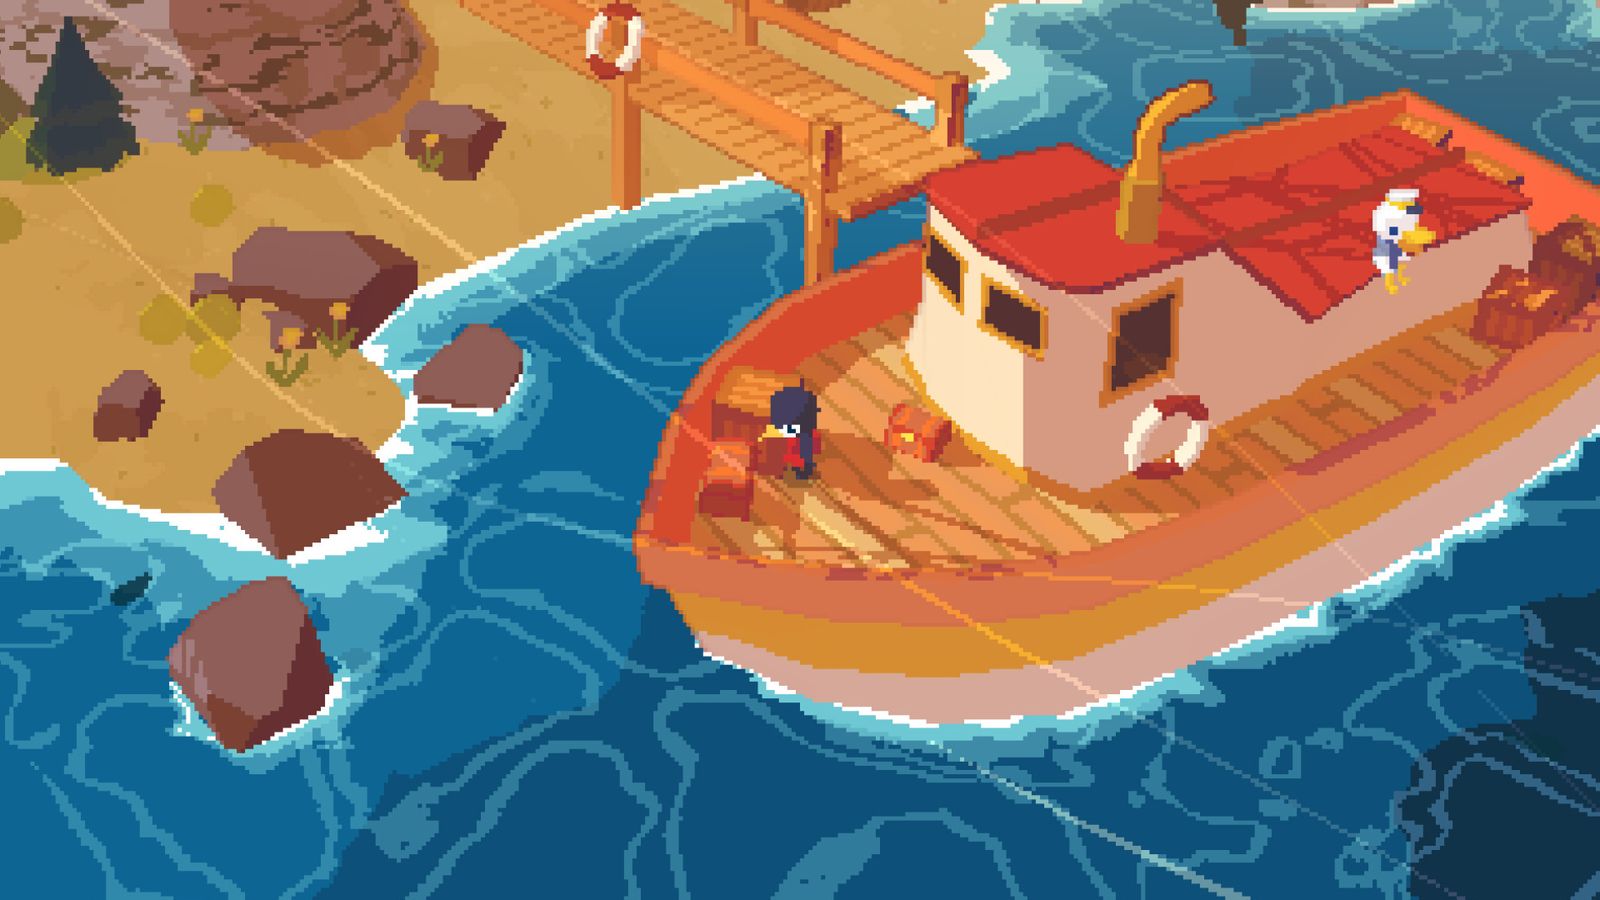 In-game from A Short Hike of a penguin character riding a brown and red wooden boat.